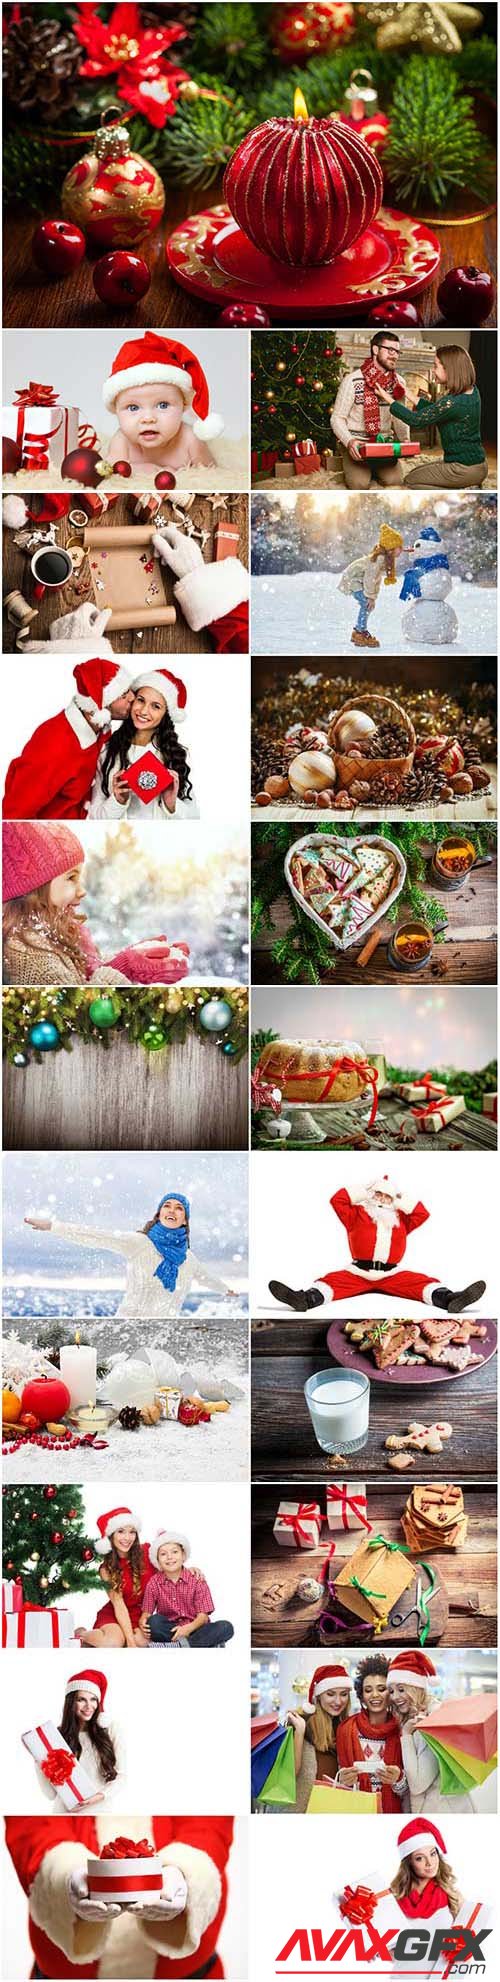 New Year and Christmas stock photos 95